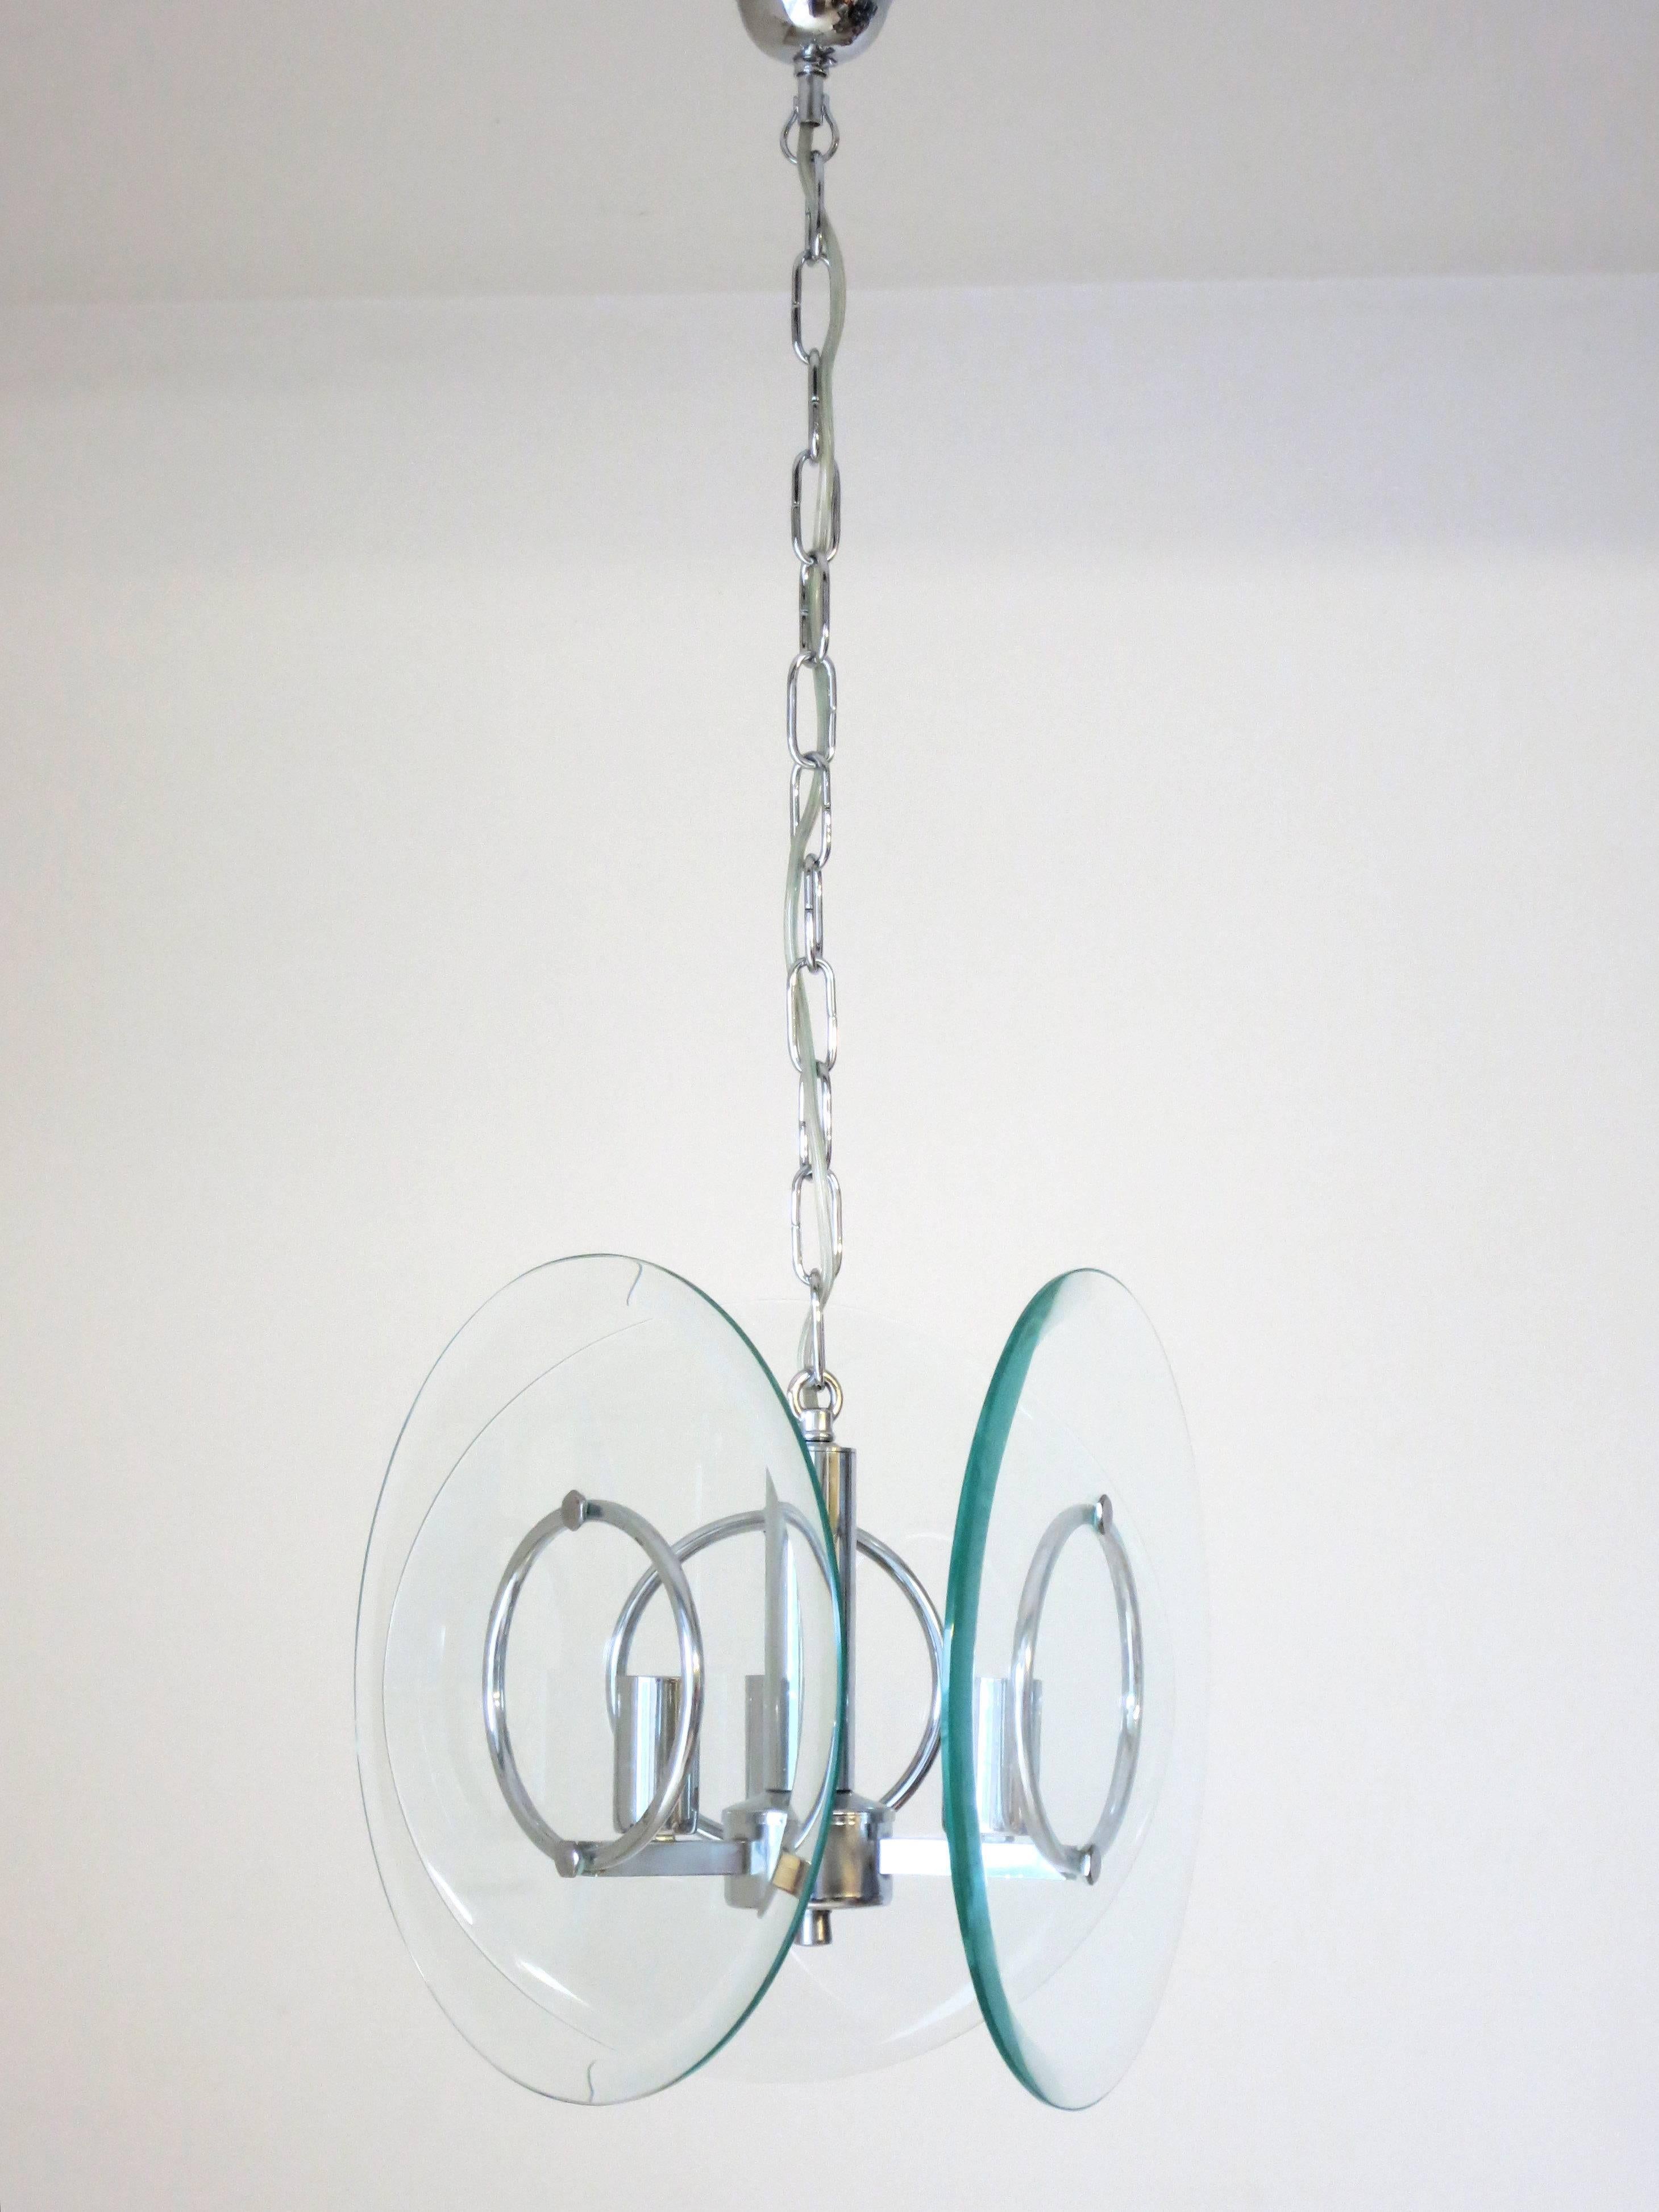 Vintage Italian pendant with three thick clear beveled glass disks, mounted on chrome frame / Designed by Cristal Art circa 1960’s / Made in Italy 
3 lights / E12 or E14 type / max 40W each 
Diameter: 10 inches / Height: 31.5 inches including chain